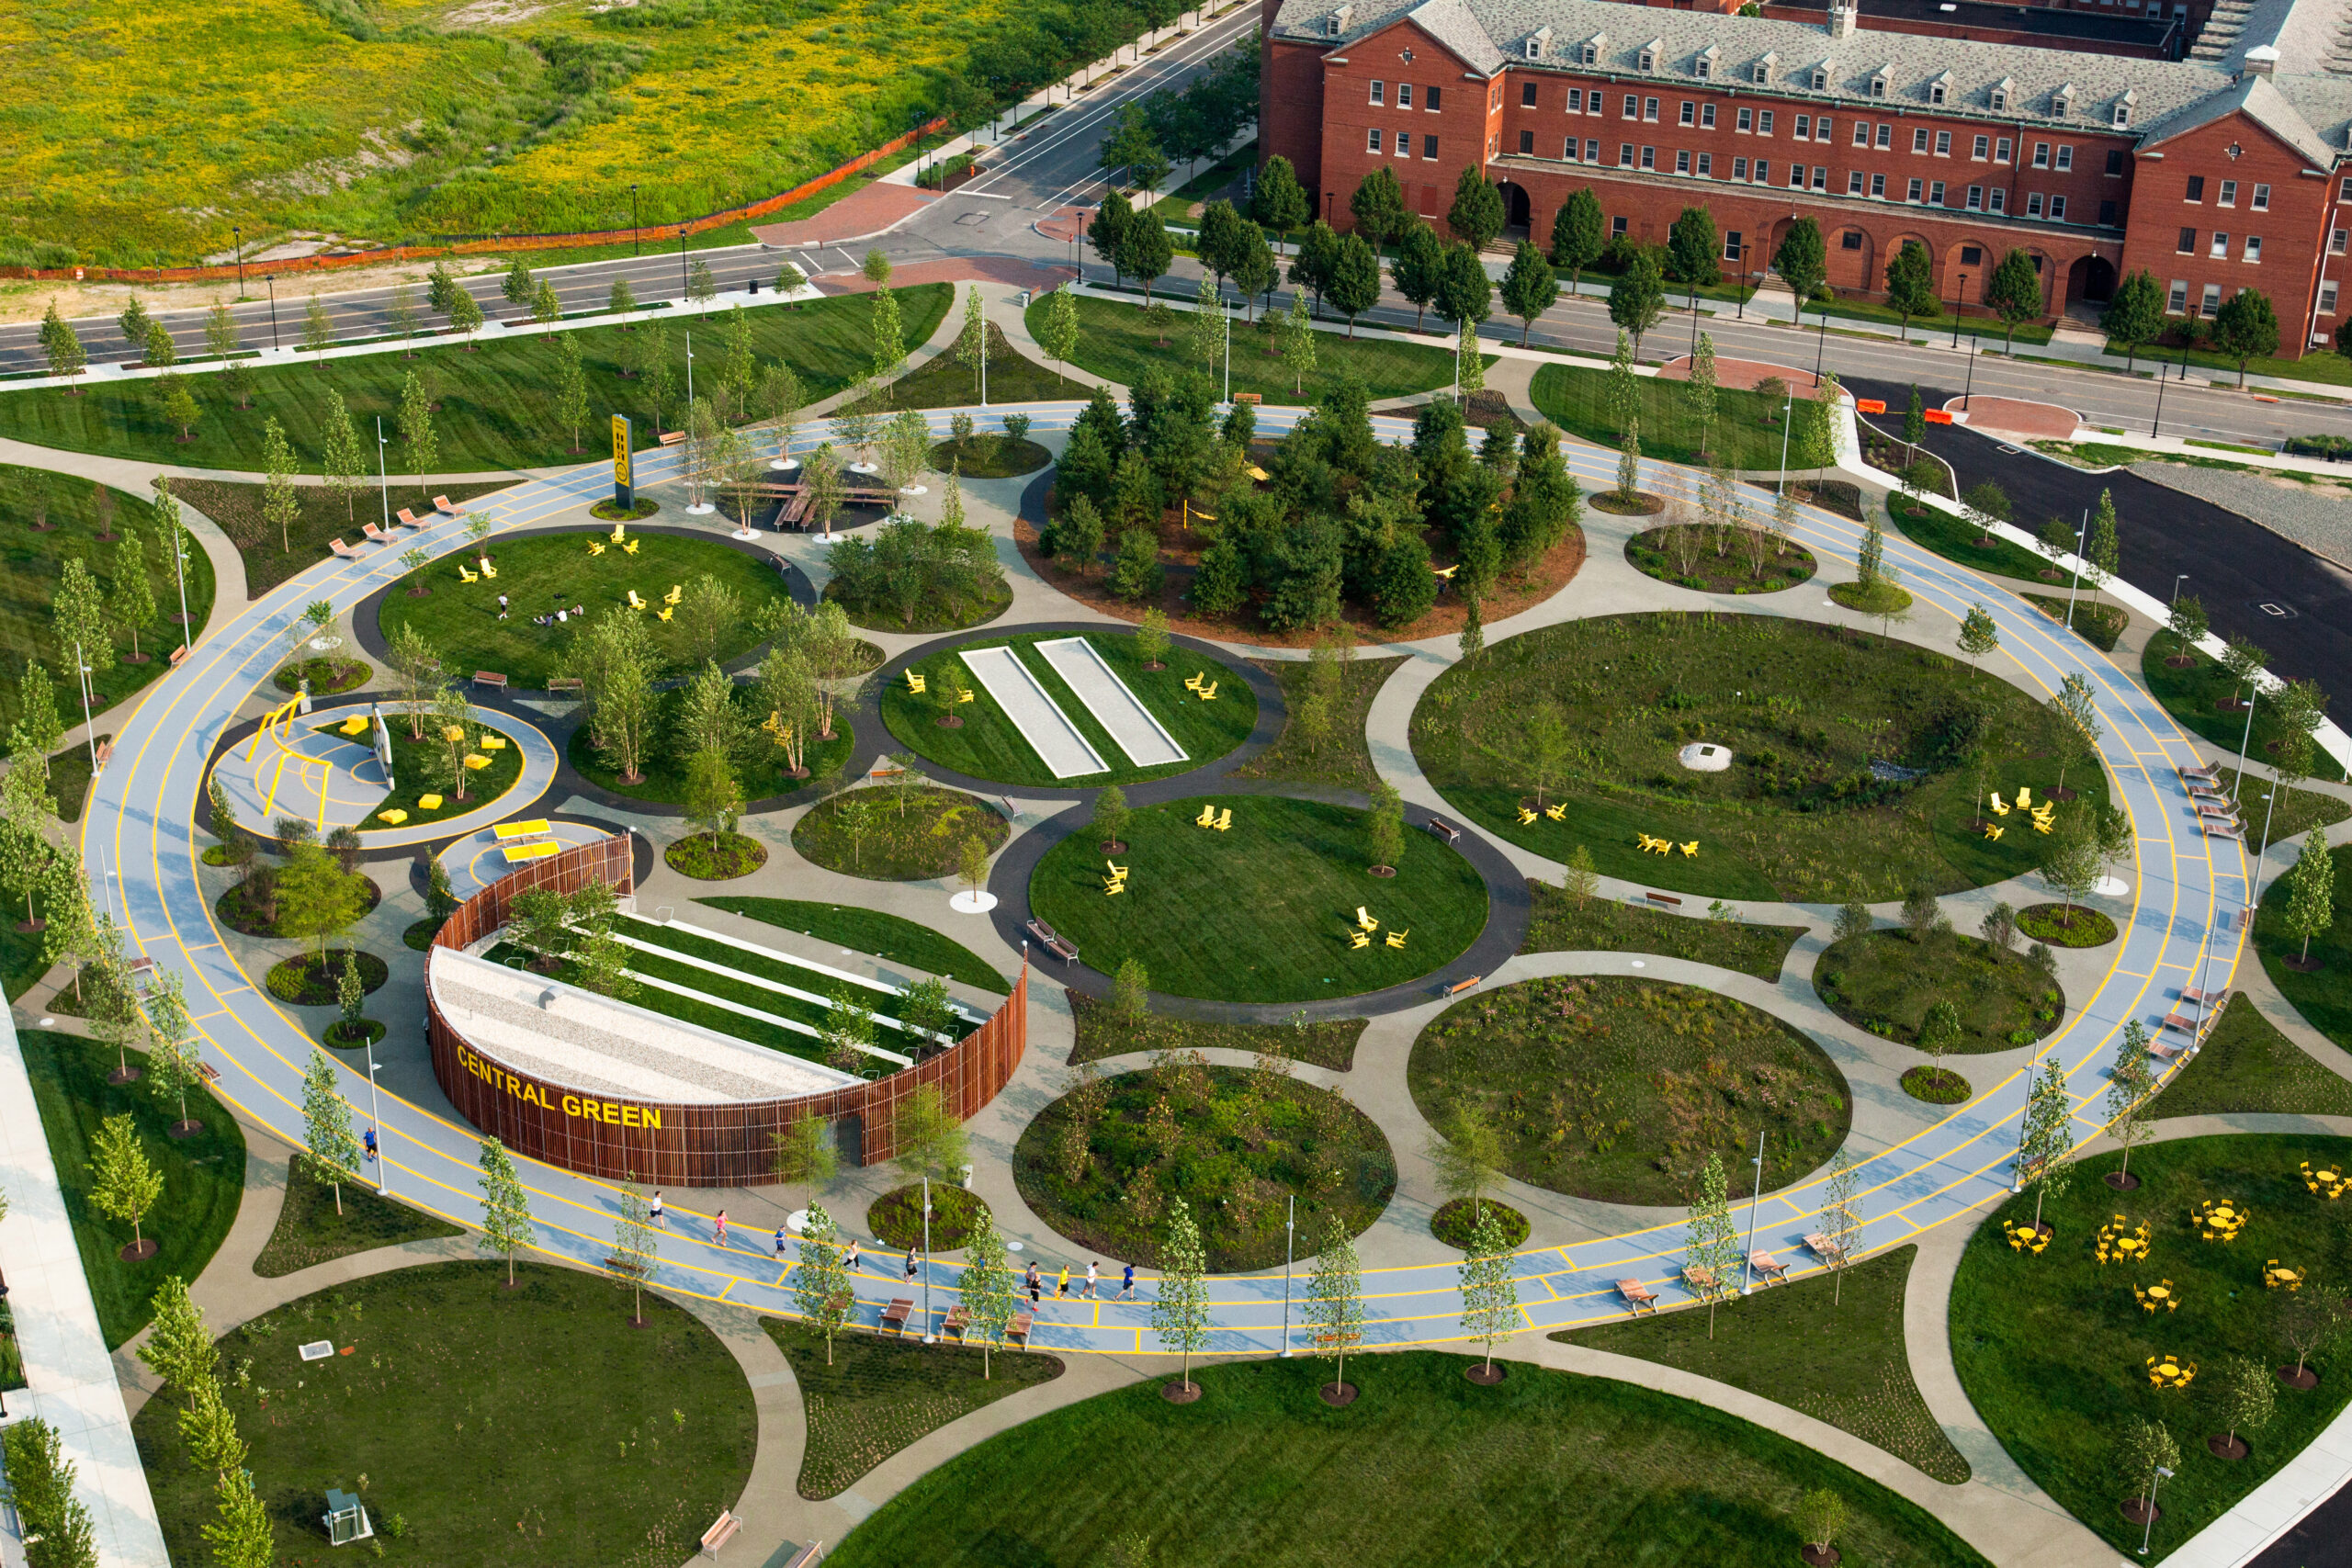 A semi-areal view of the Navy Yard Central Green, showcasing various activity zones offered by the public space.